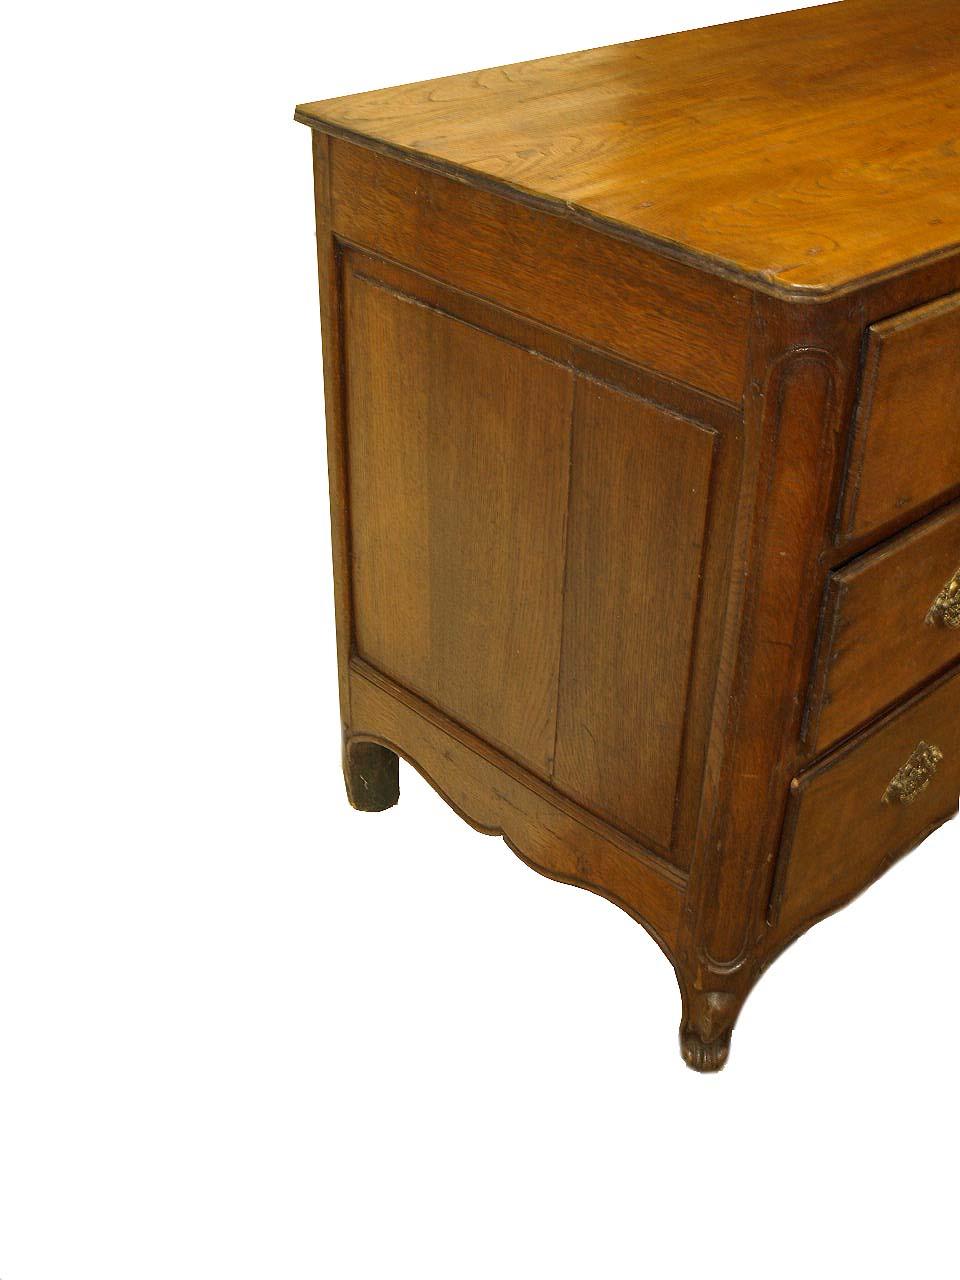 French oak and elm commode, the elm top with beautiful grain and a nice faded patina; raised panel sides, the front corners are rounded and surrounded by a raised carved molding, the drawers with overlapping beaded edges feature rococo brass pulls,